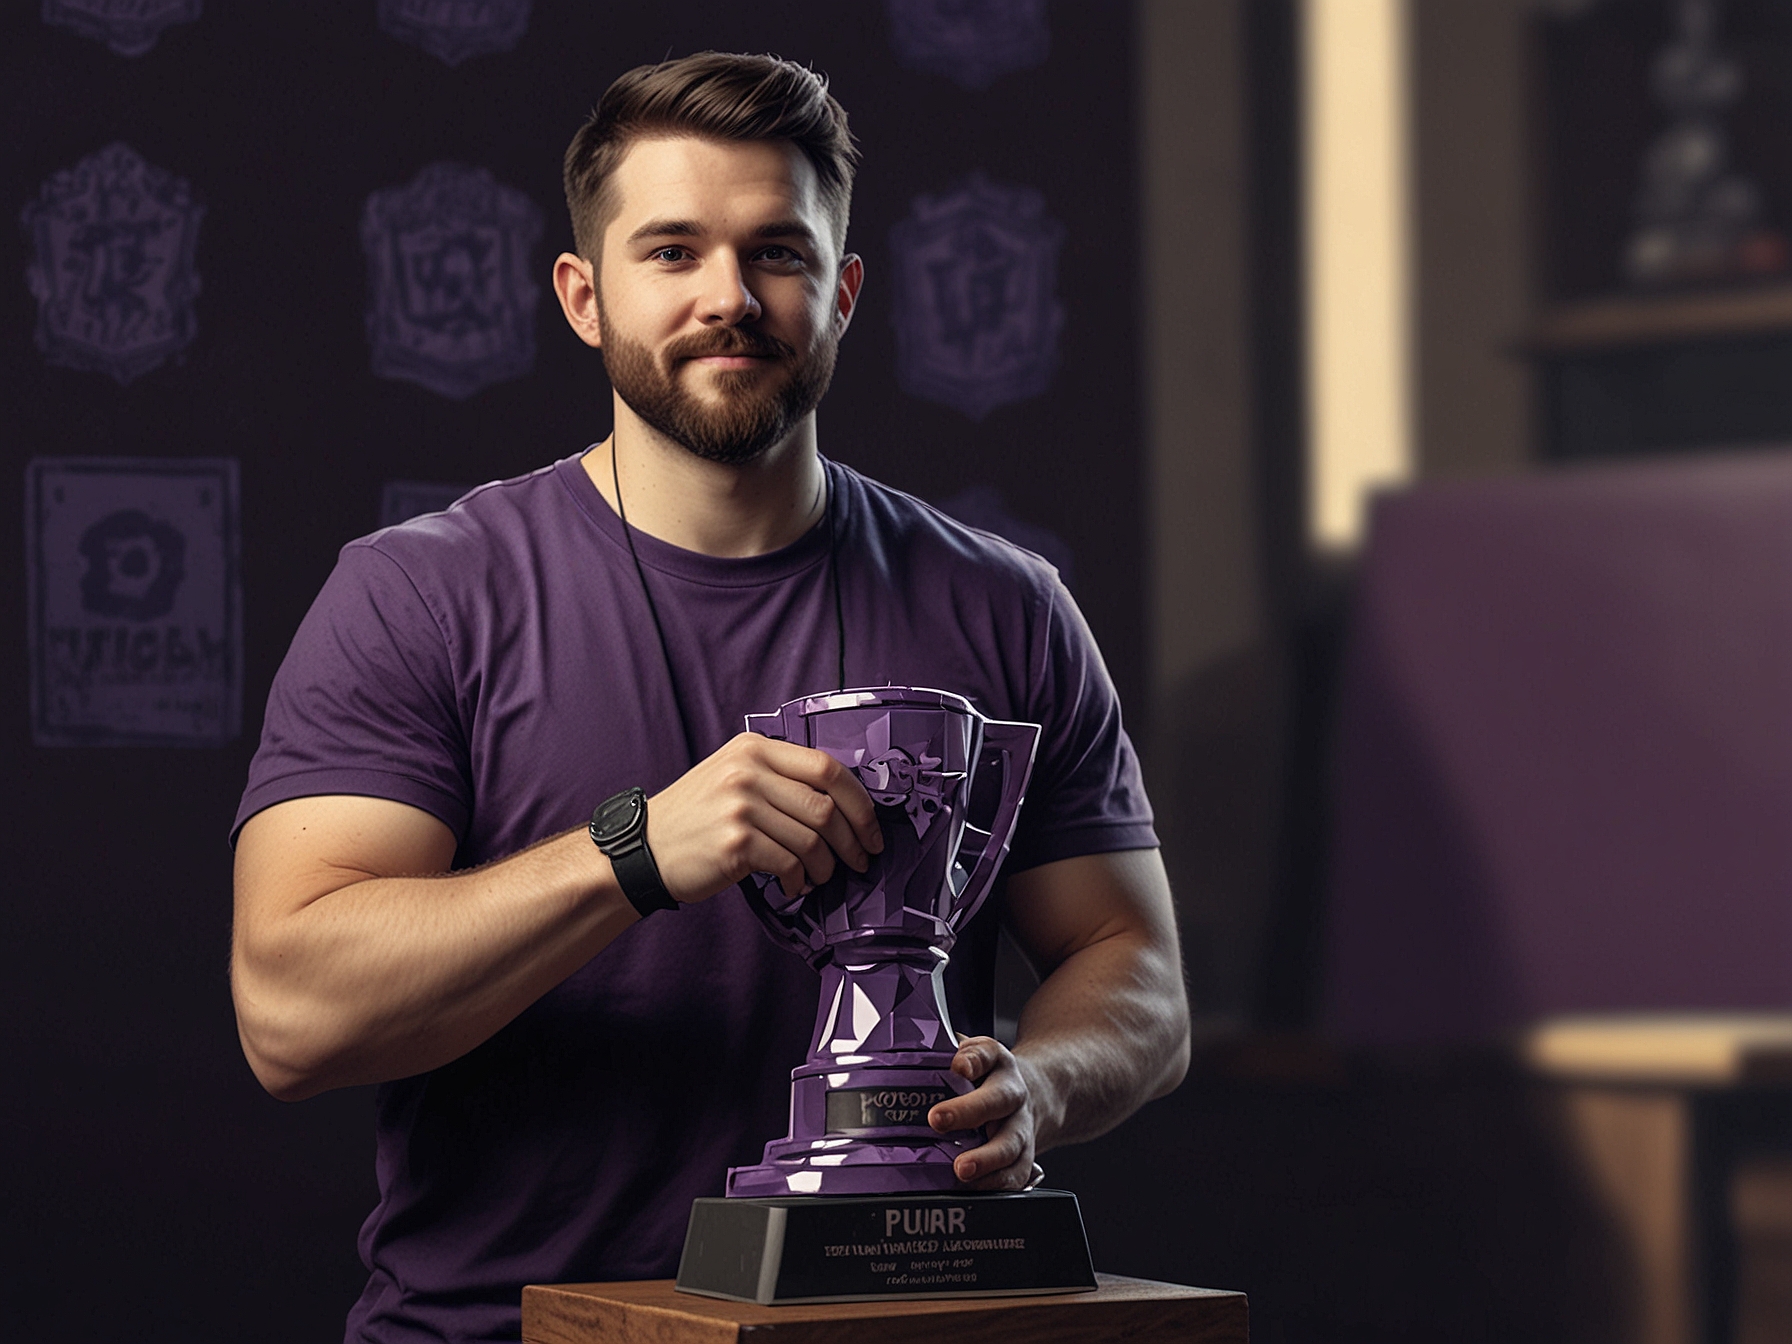 A proud Twitch streamer holding their 'Bleed Purple Statue', with the award prominently displayed, symbolizing their hard work and dedication to achieving watch hour milestones.